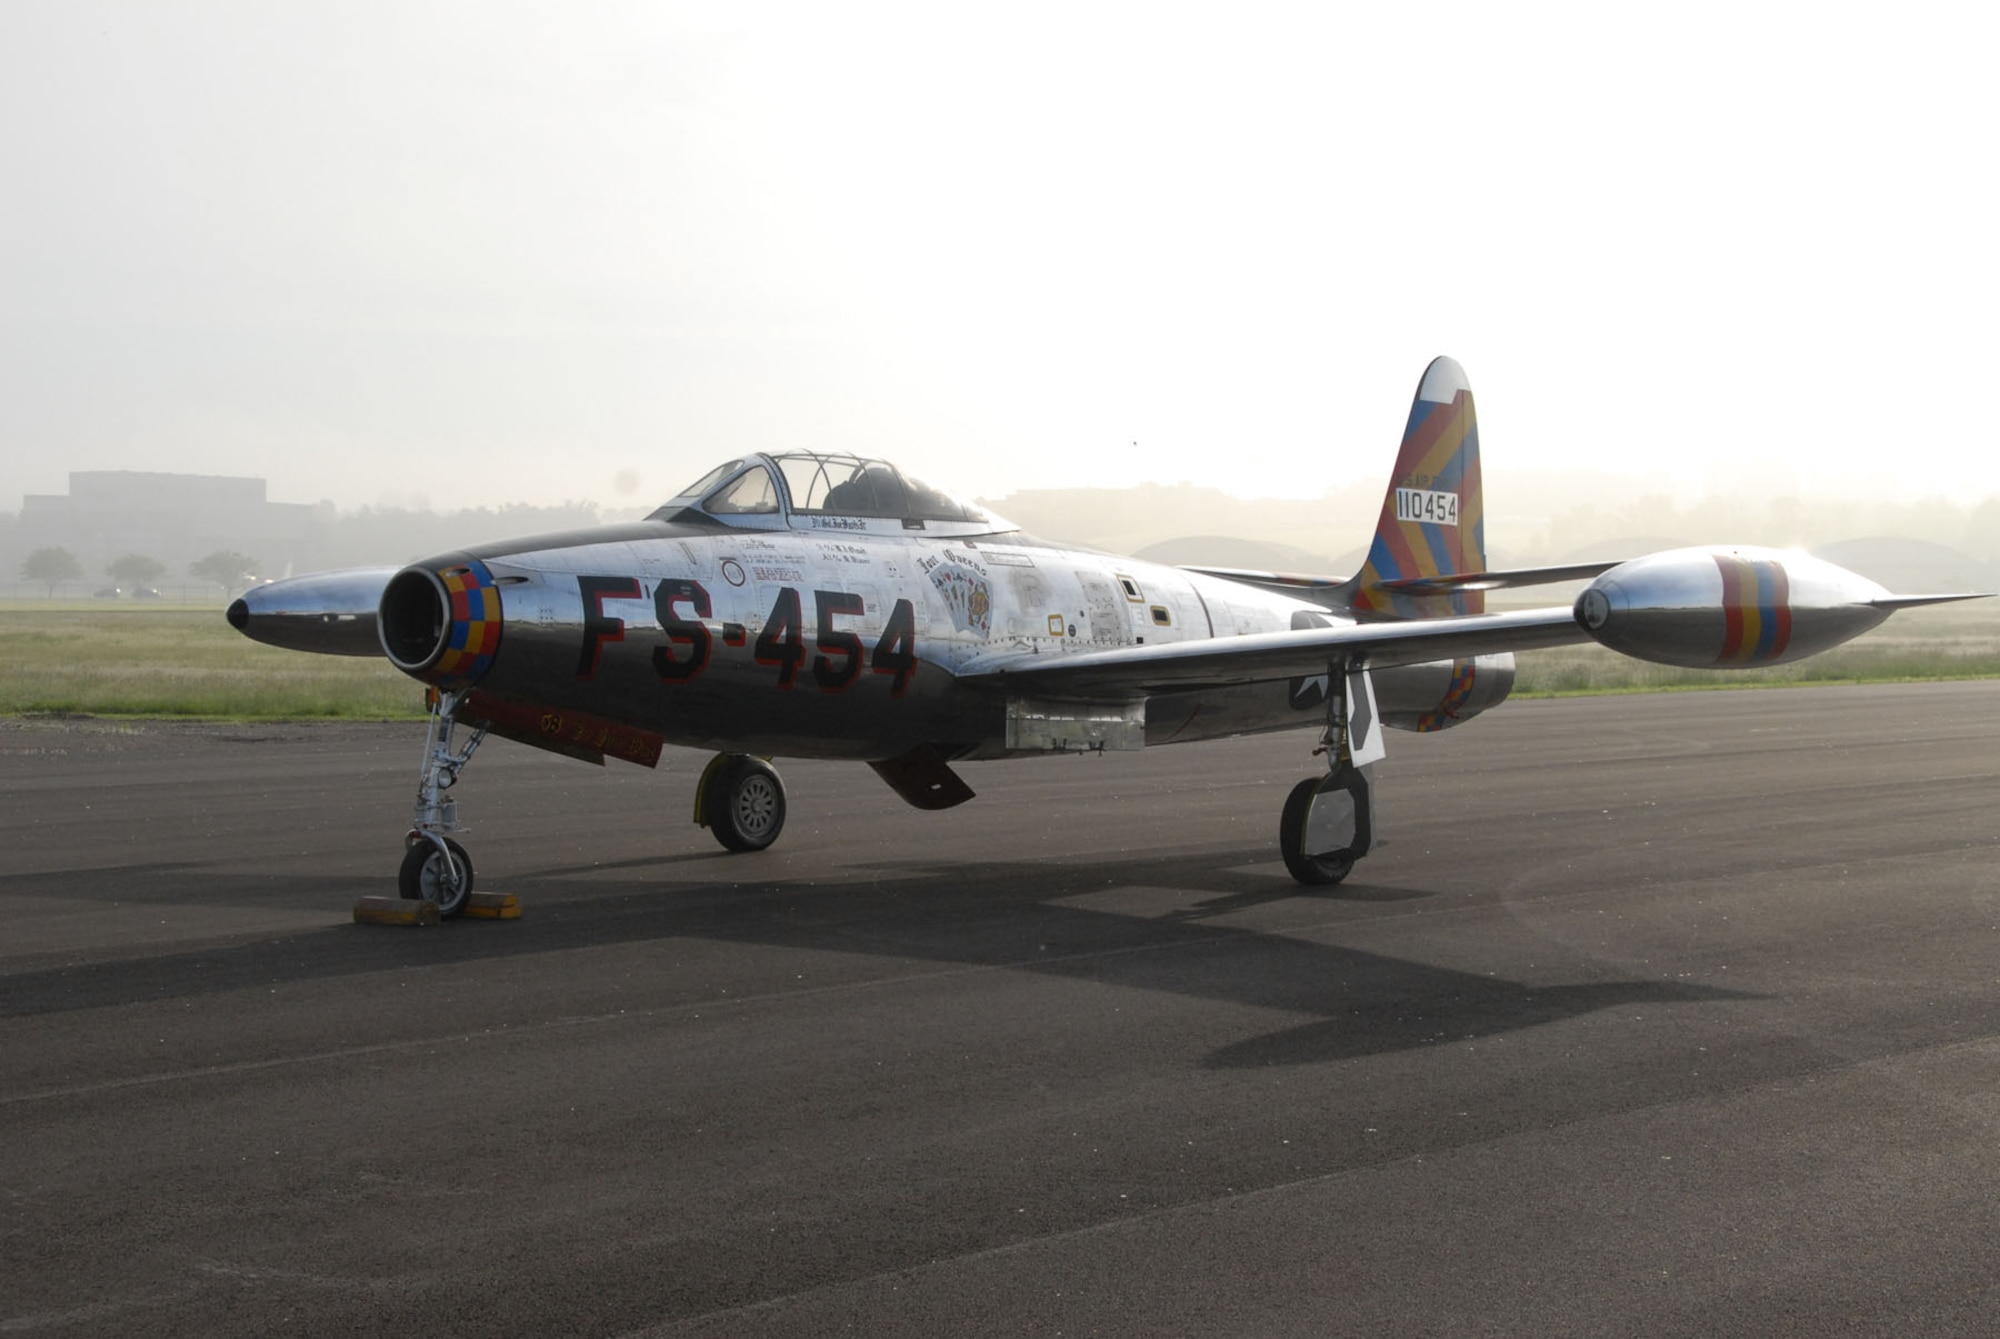 DAYTON, Ohio -- Republic F-84 Thunderjet at the National Museum of the United States Air Force. (U.S. Air Force photo)